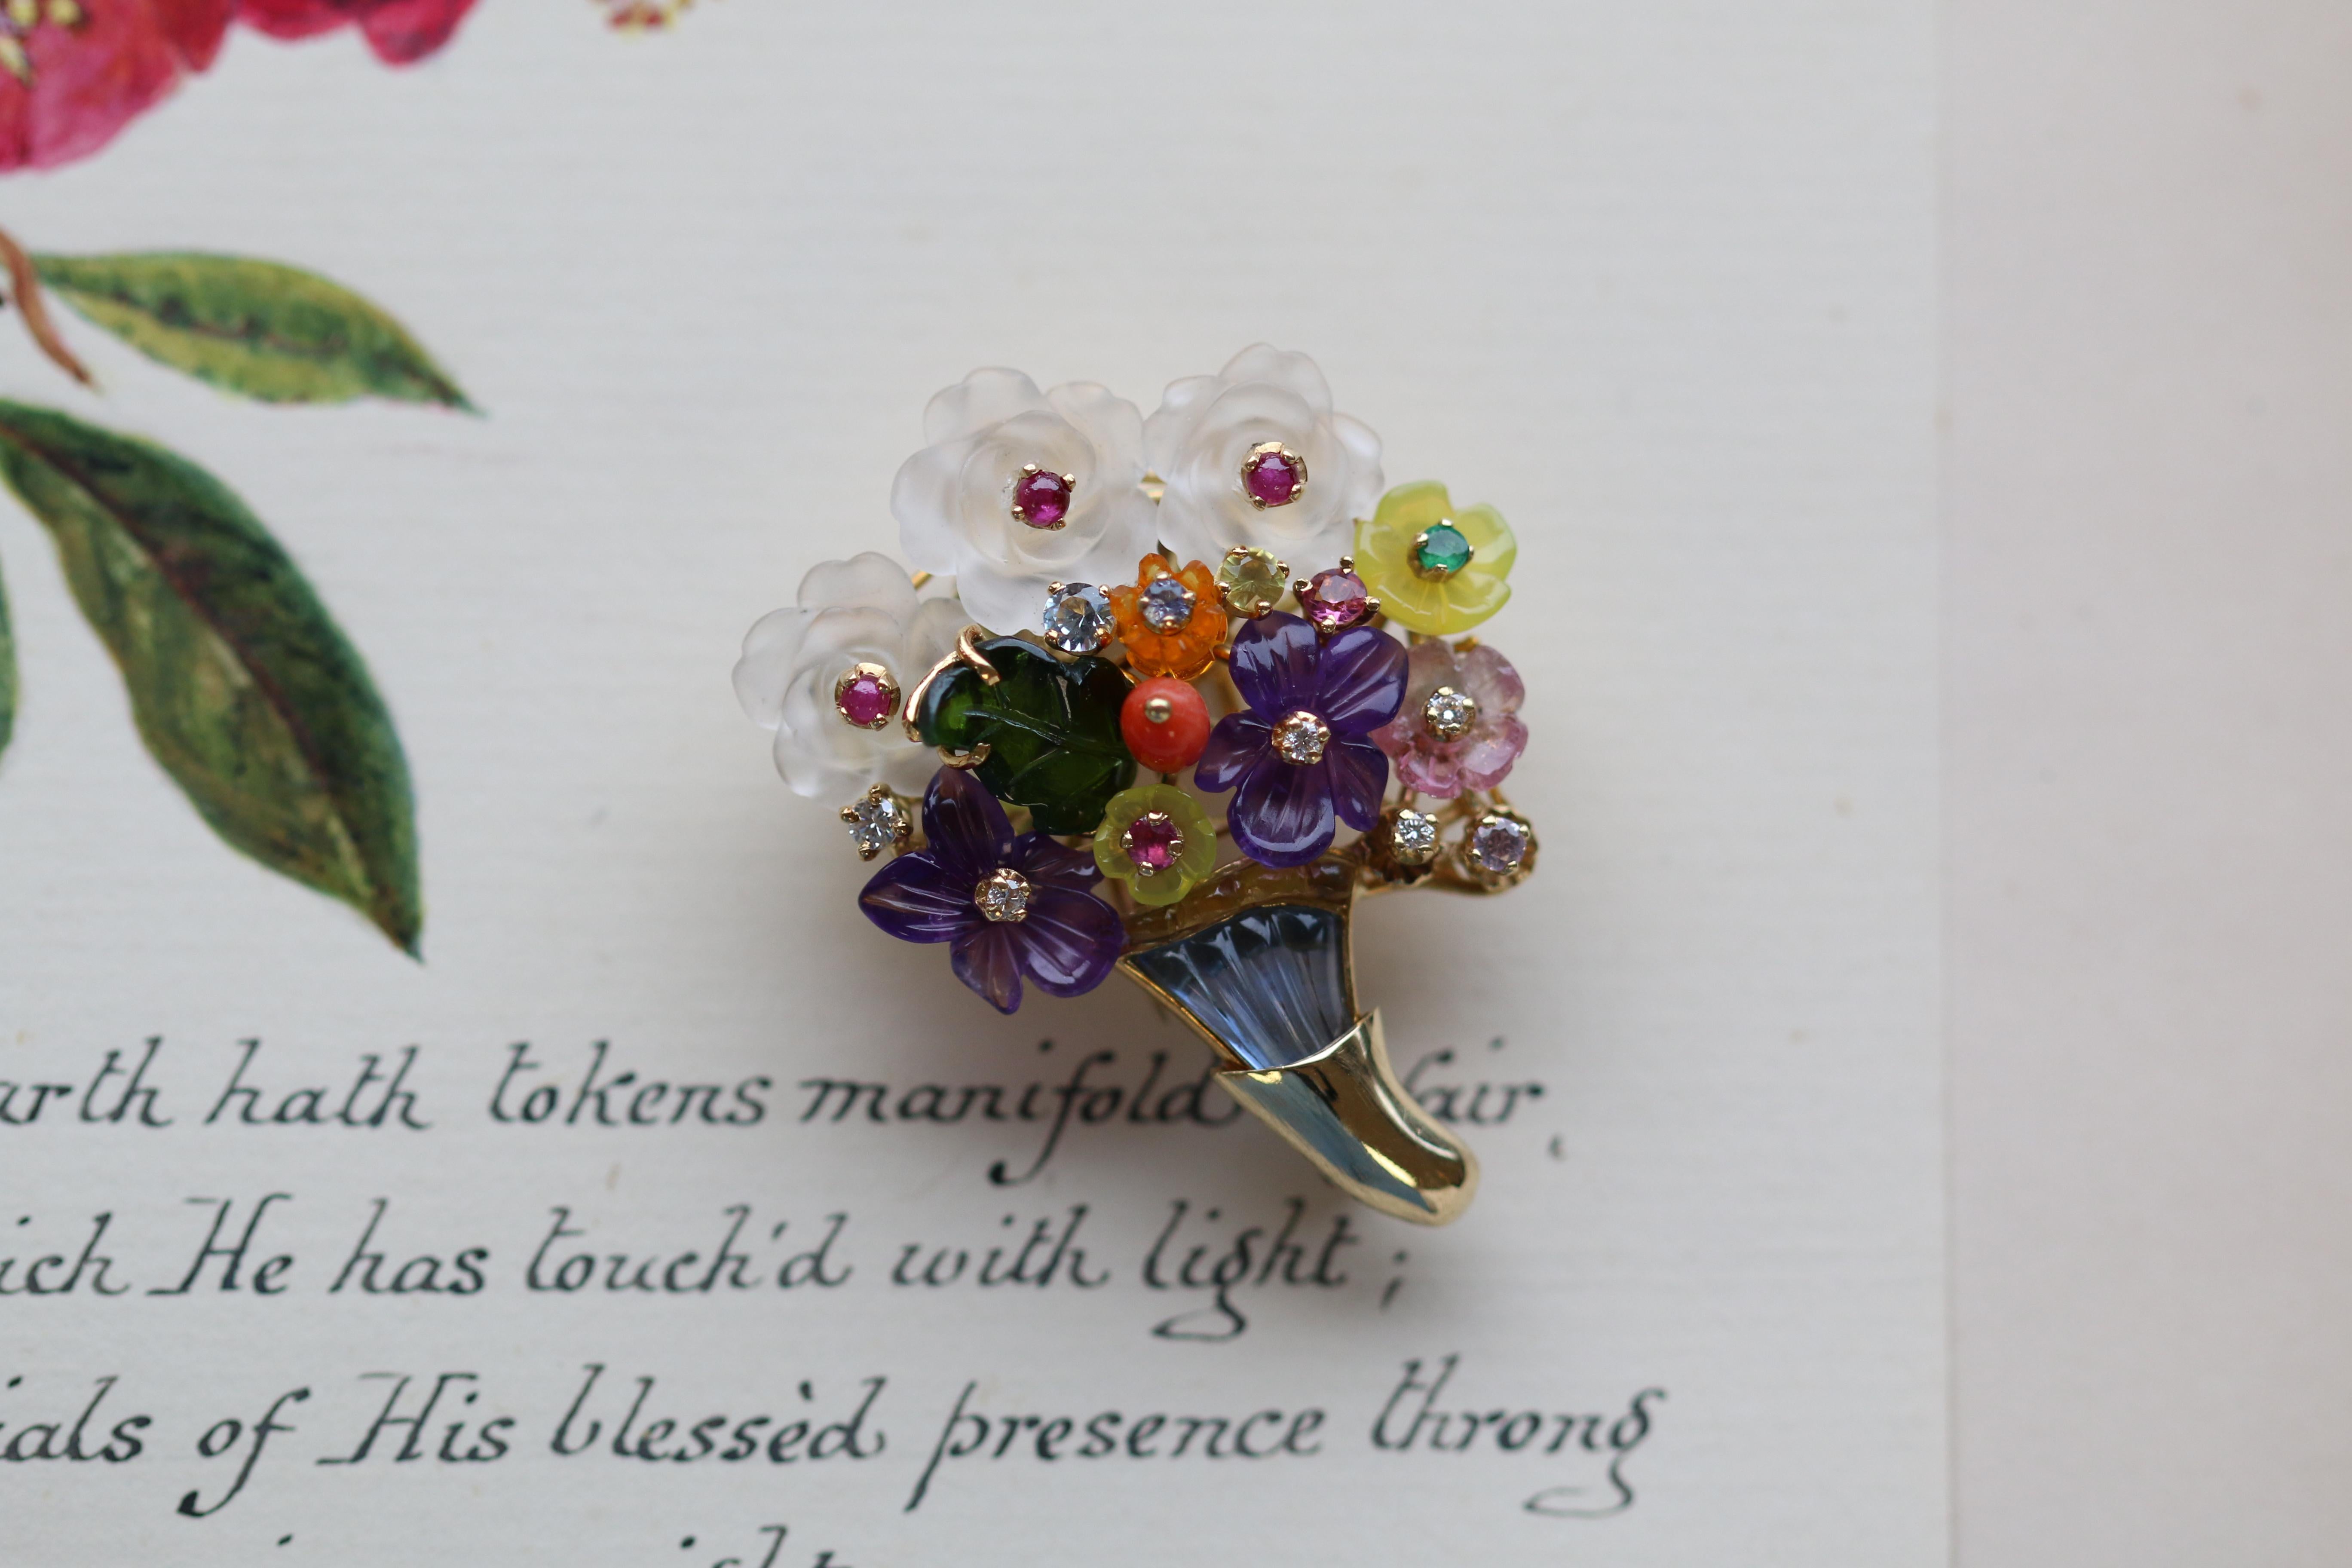 A radiant multi-gem floral brooch bursting with colour and delicate design. A posy of intricate and unique flowers crafted from a variety of gems, from rock crystal, ruby, emerald, and amethyst to coral, peridot, opal, and diamonds. Just some of the